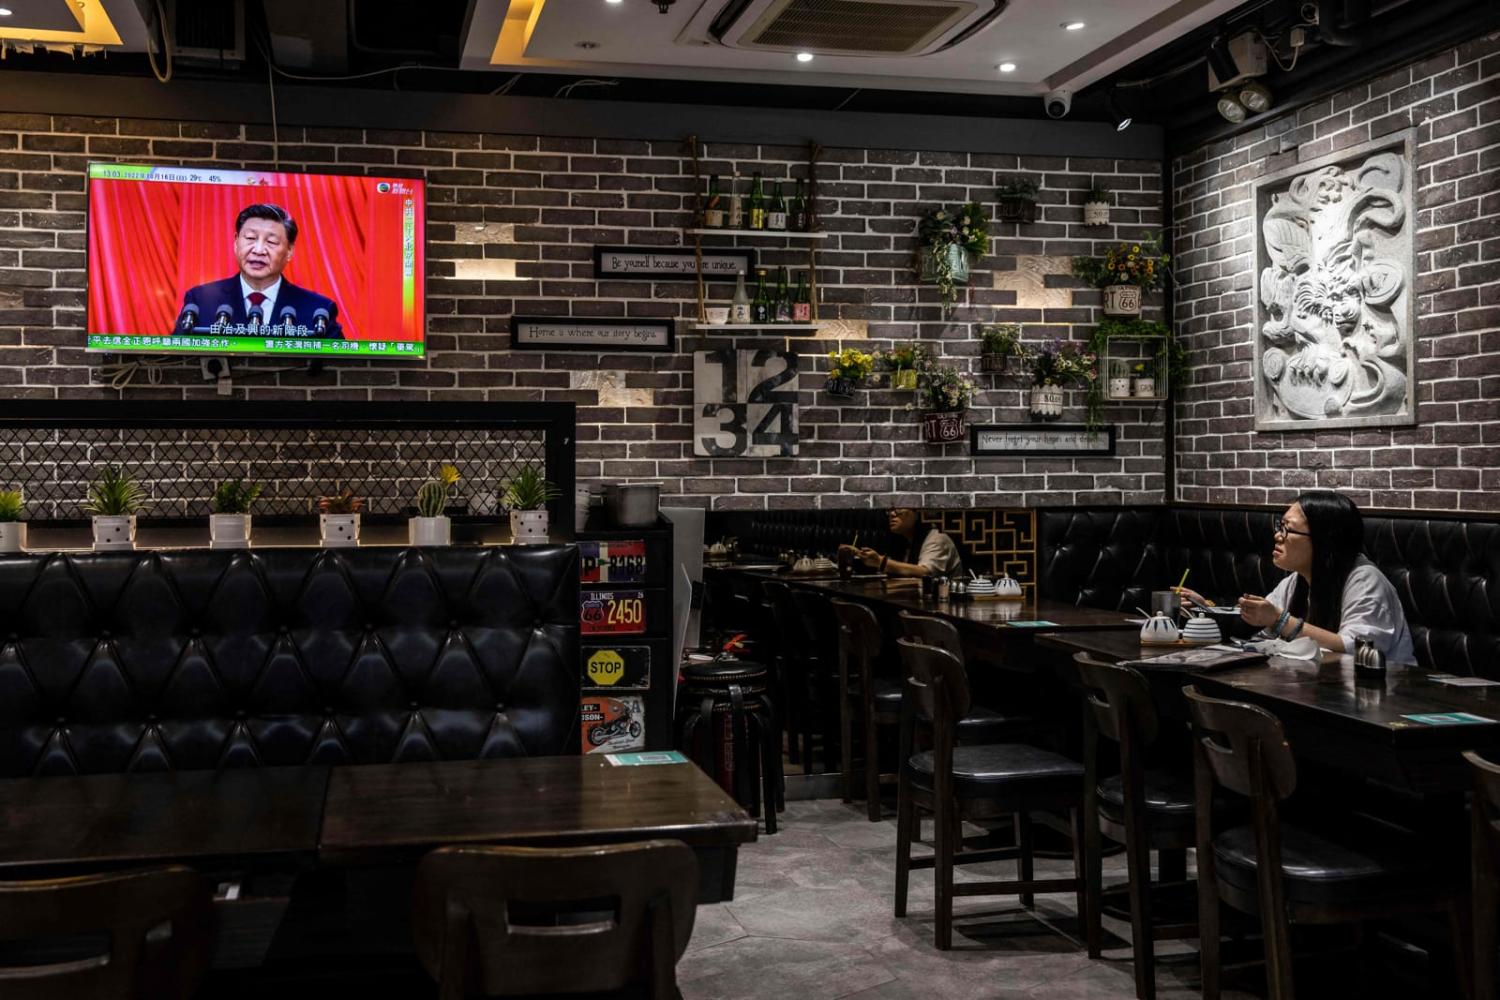 China’s President Xi Jinping is seen on a TV screen in a restaurant in Hong Kong on 16 October as he delivers the opening speech of the ruling Communist Party’s 20th party congress in Beijing (Isaac Lawrence/AFP via Getty Images)